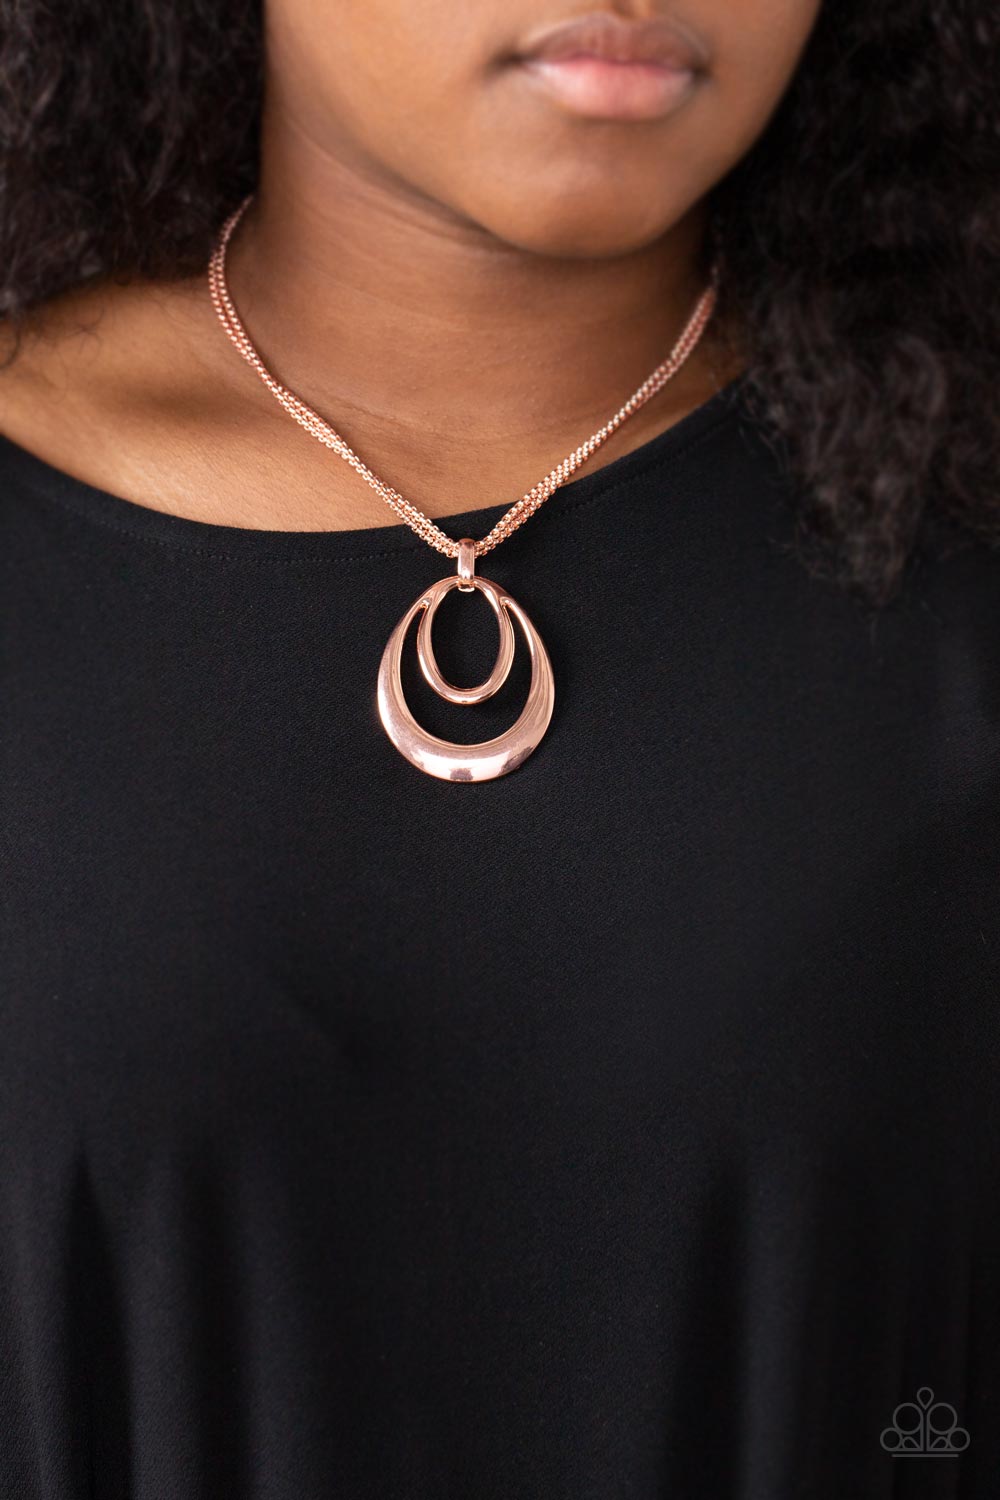 copper, copper jewelry, shiny copper, necklace, medium necklace, affordable jewelry, paparazzi accessories, everyday jewelry, jewelry store, jewelry stores near me, 